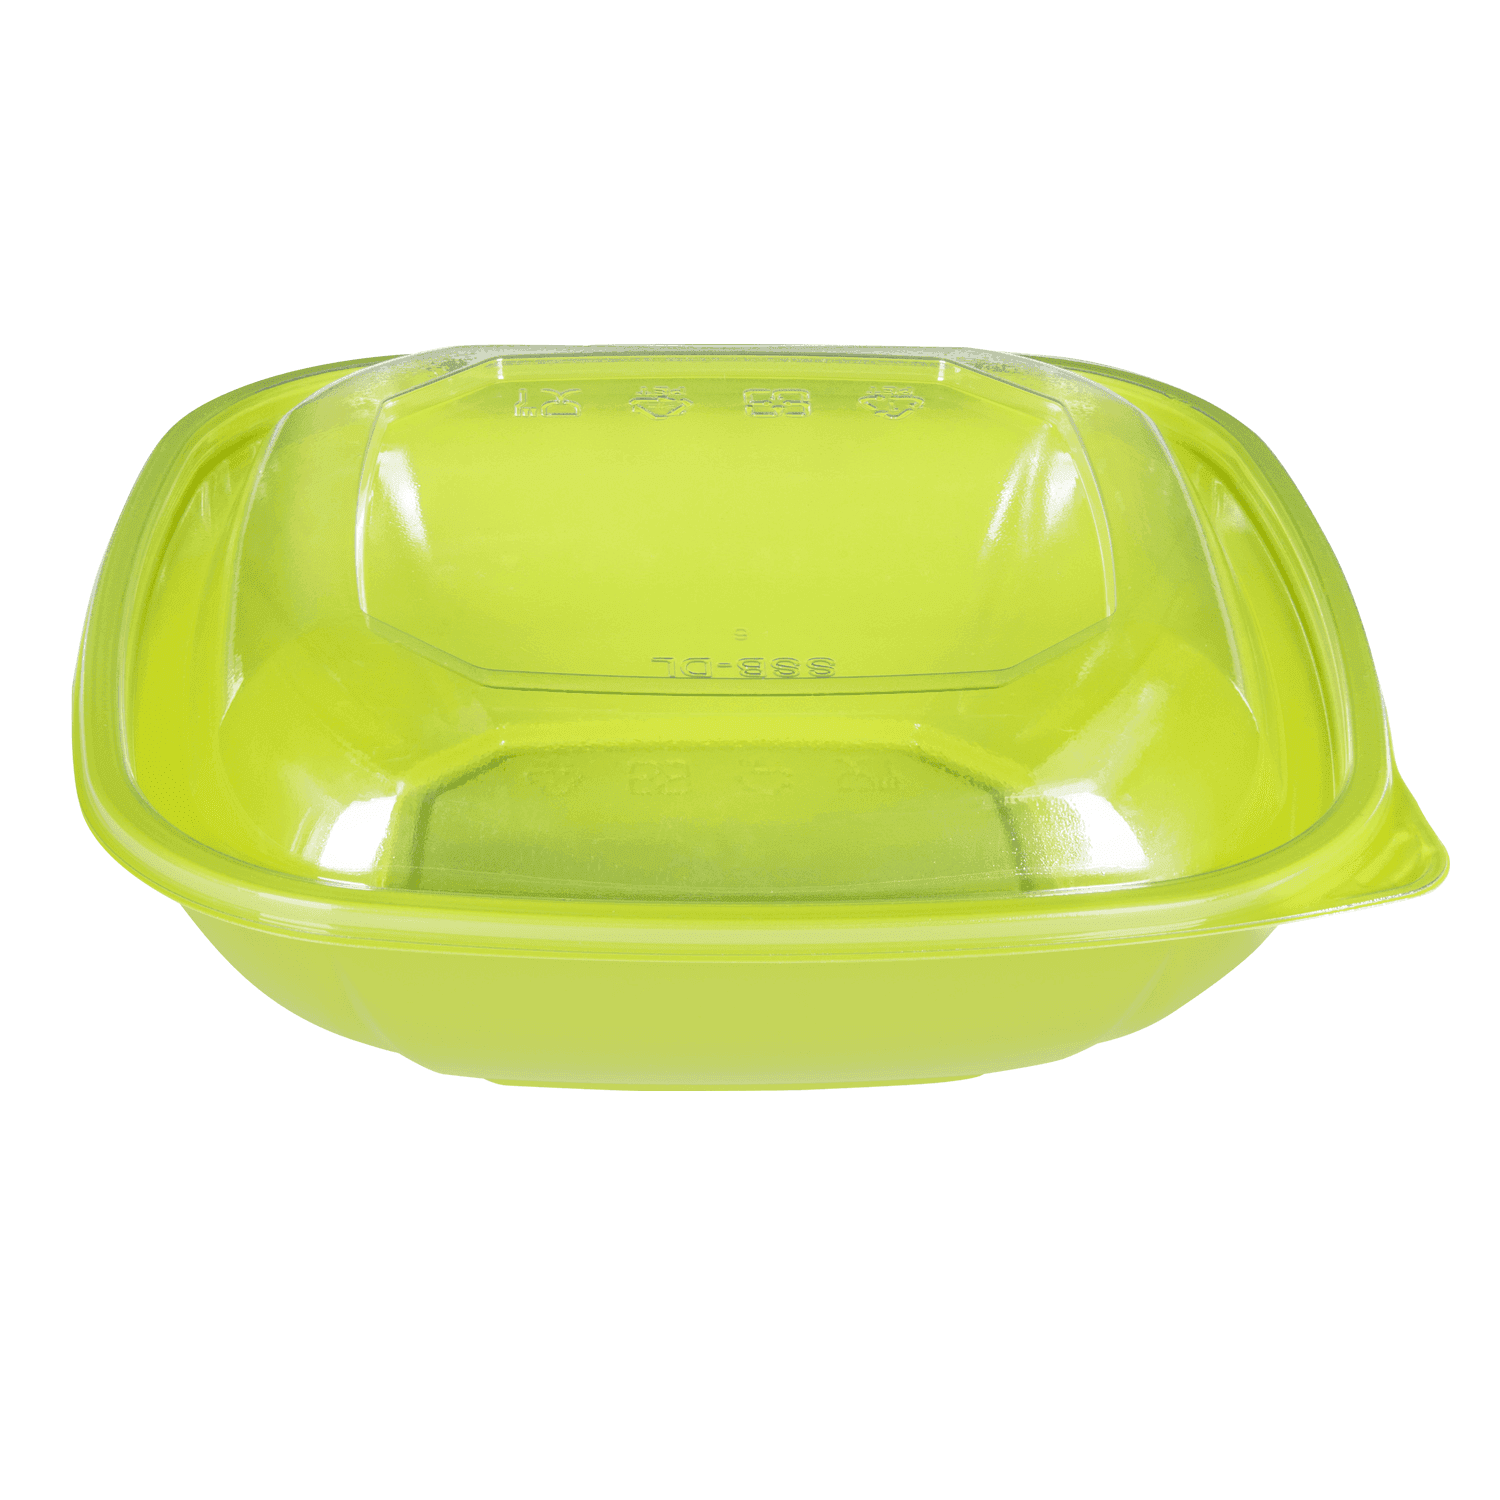 Green Karat 32oz PET Square Bowl with matching clear lid